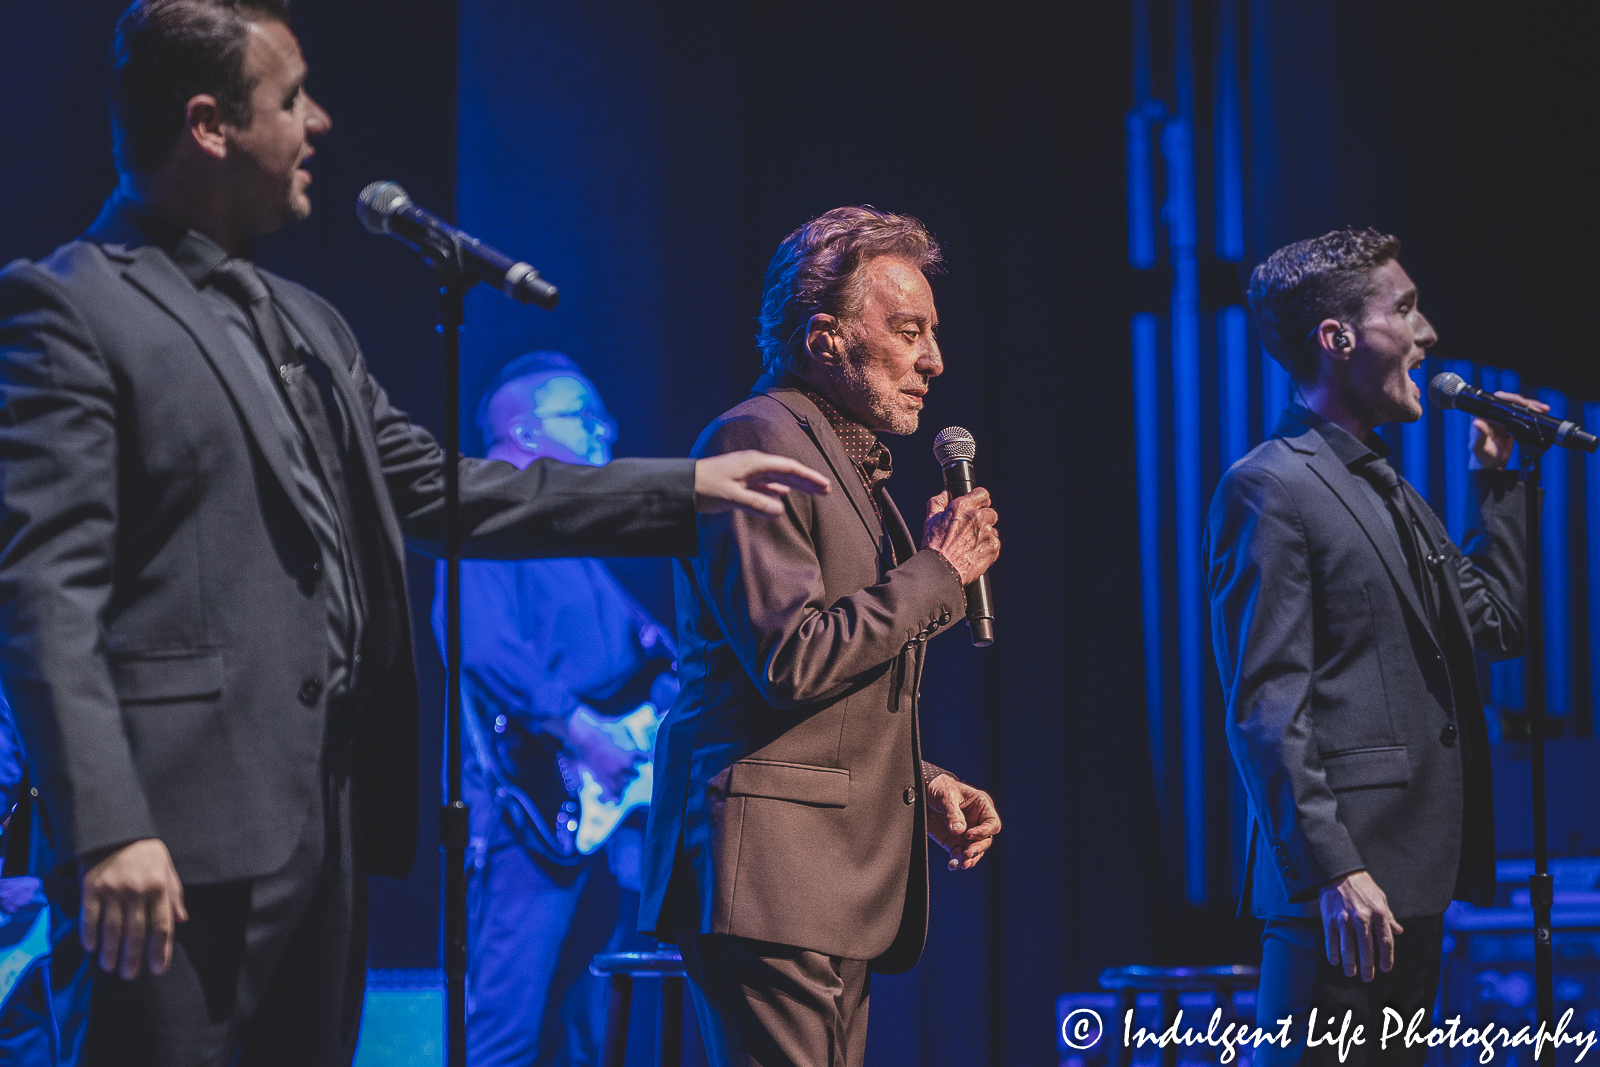 Live concert at Kauffman Center for the Performing Arts in downtown Kansas City, MO featuring Frankie Valli and the Four Seasons on June 4, 2022.